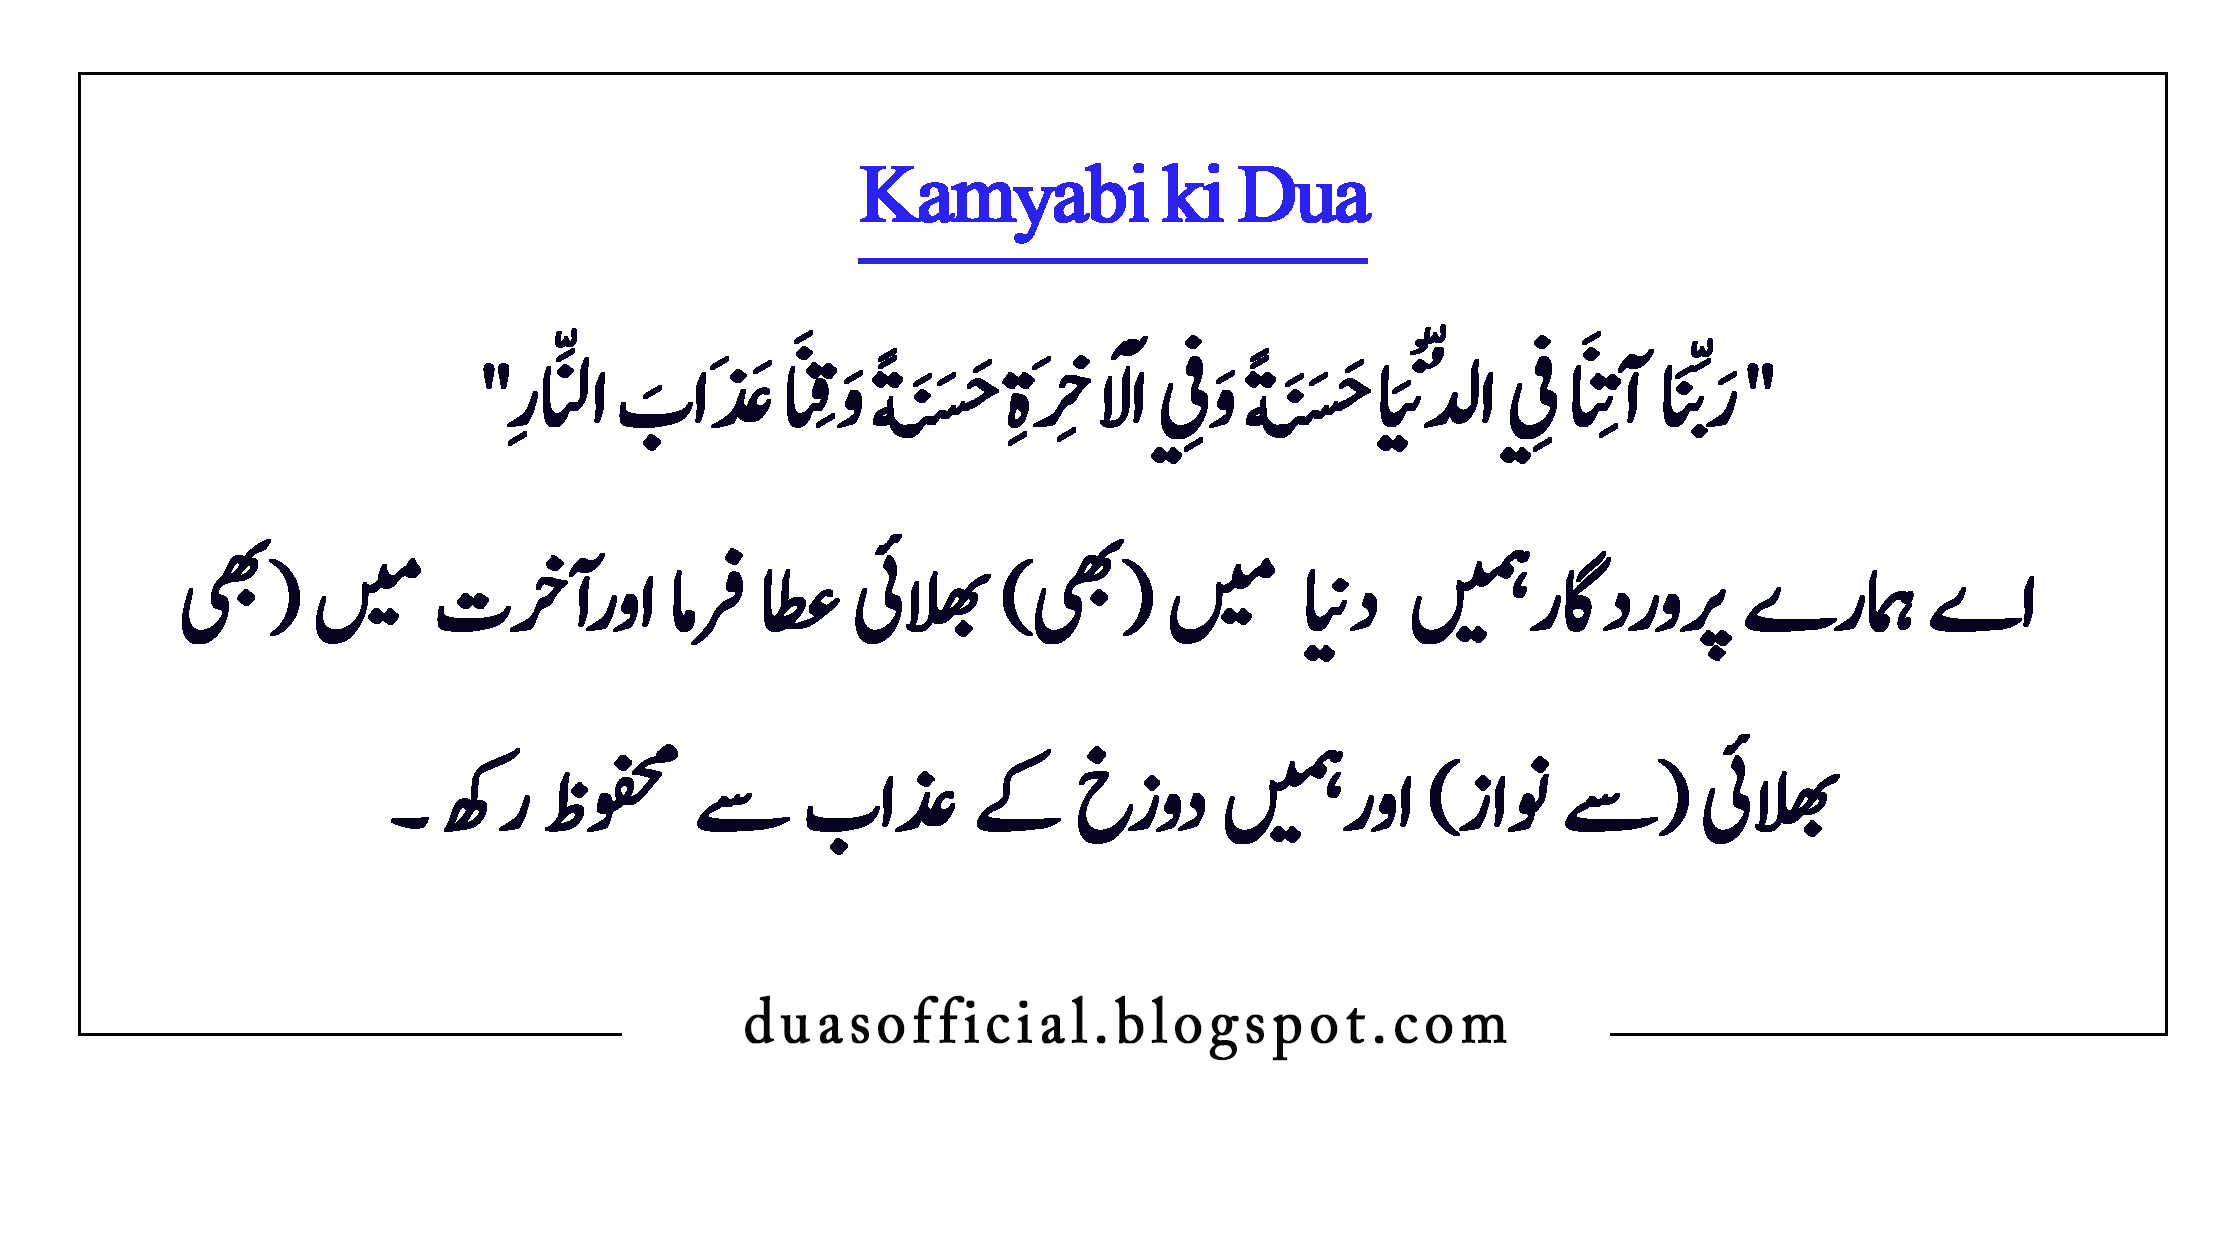 Powerful dua for success in everything